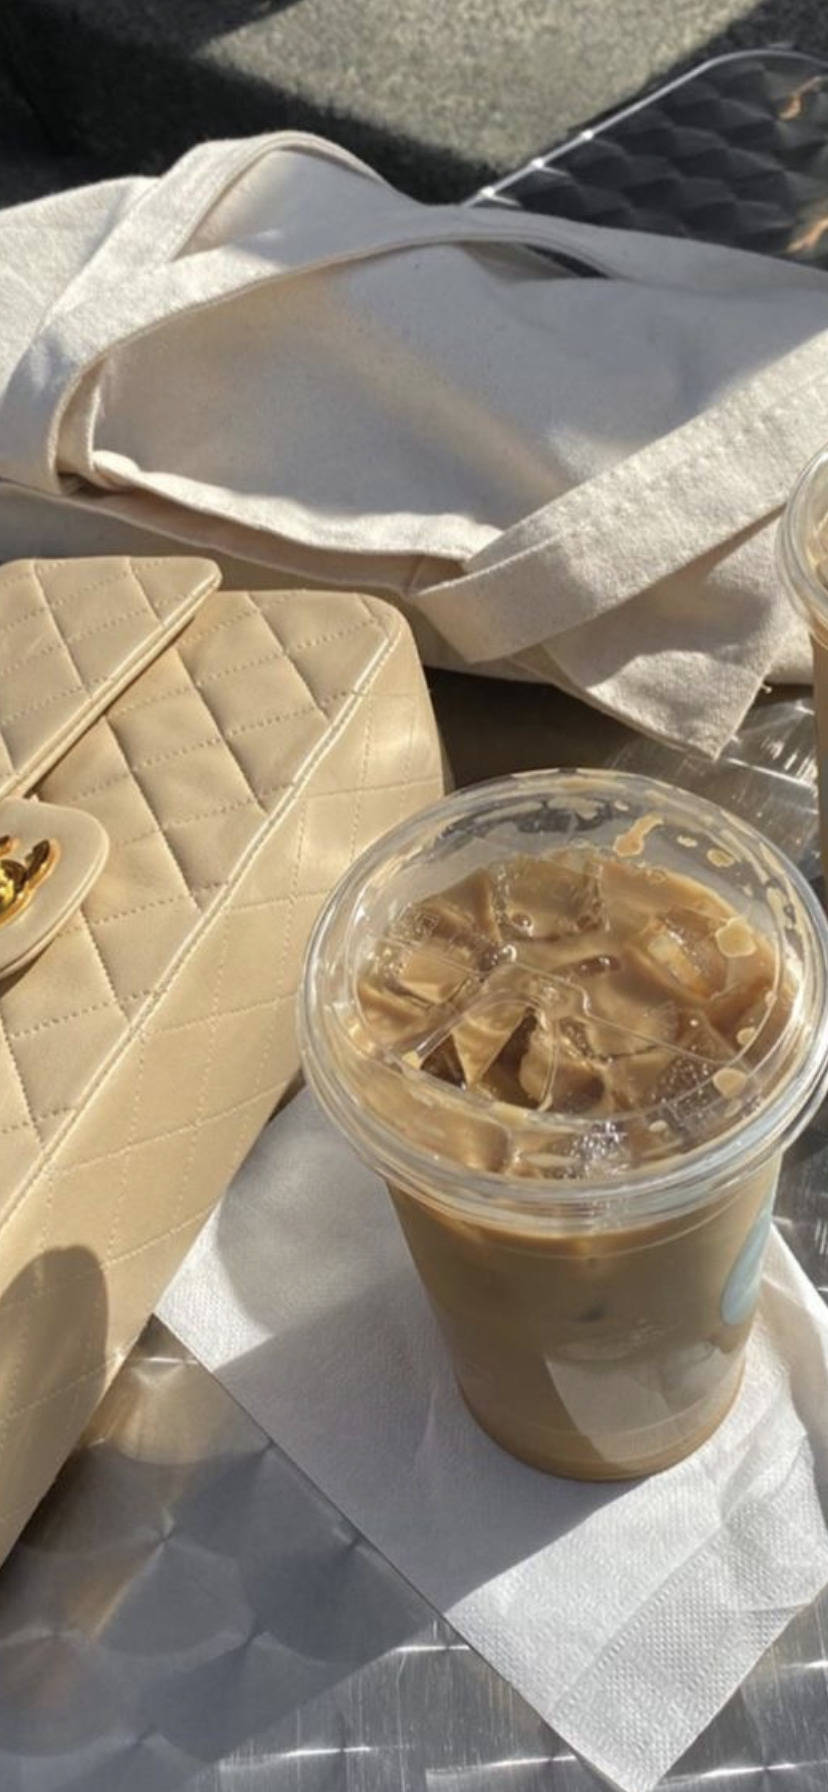 Beige Purse And Iced Coffee Aesthetic Wallpaper